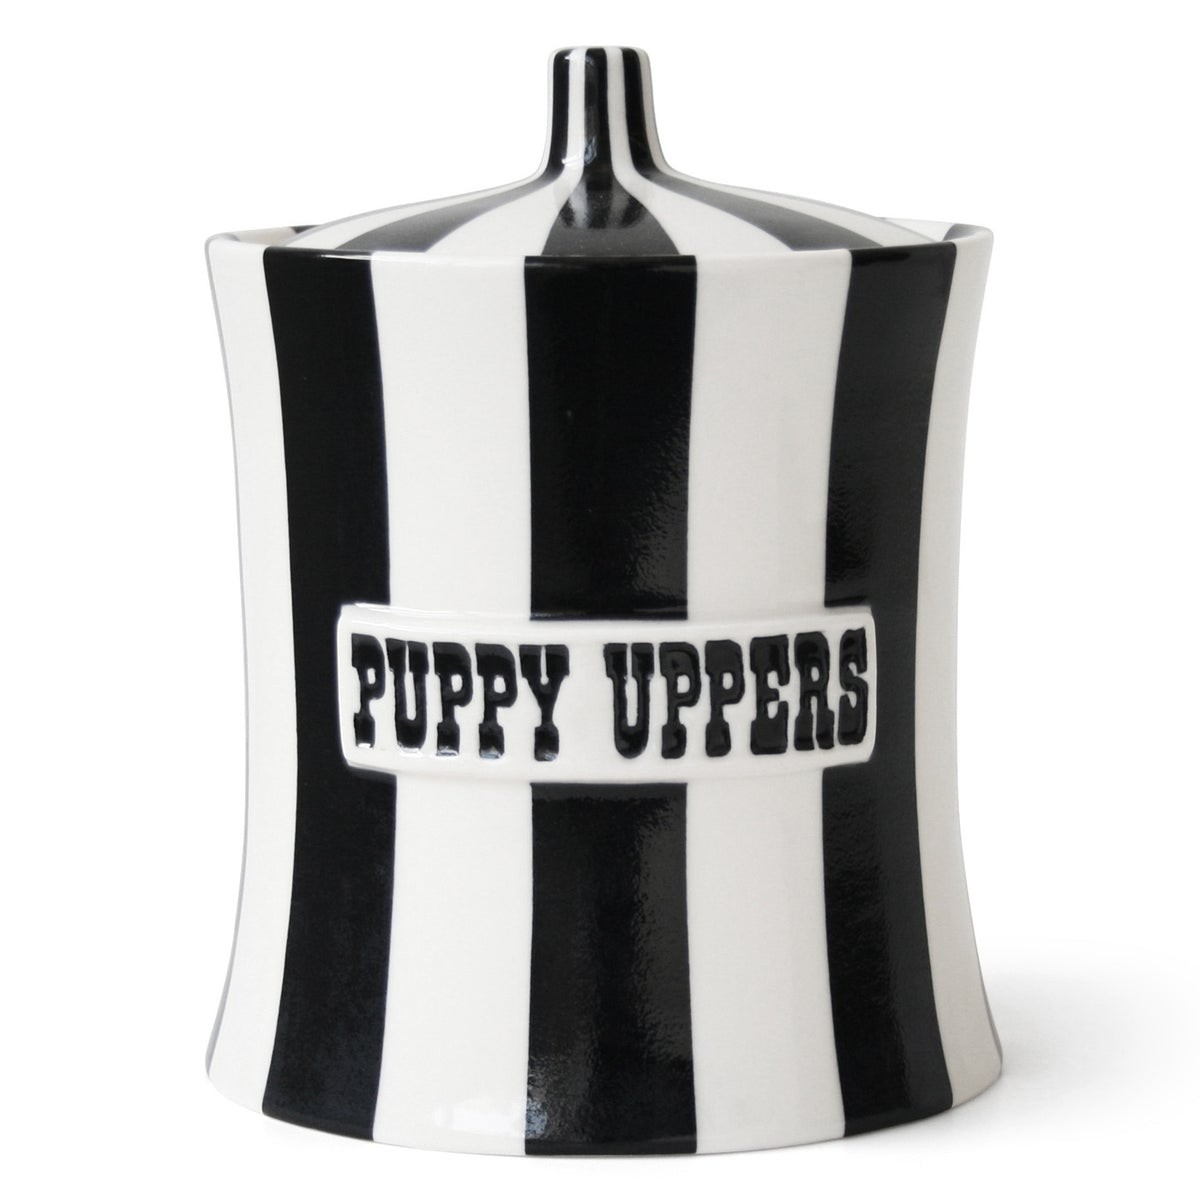 Jonathan Adler | Vice Puppy Uppers Canister